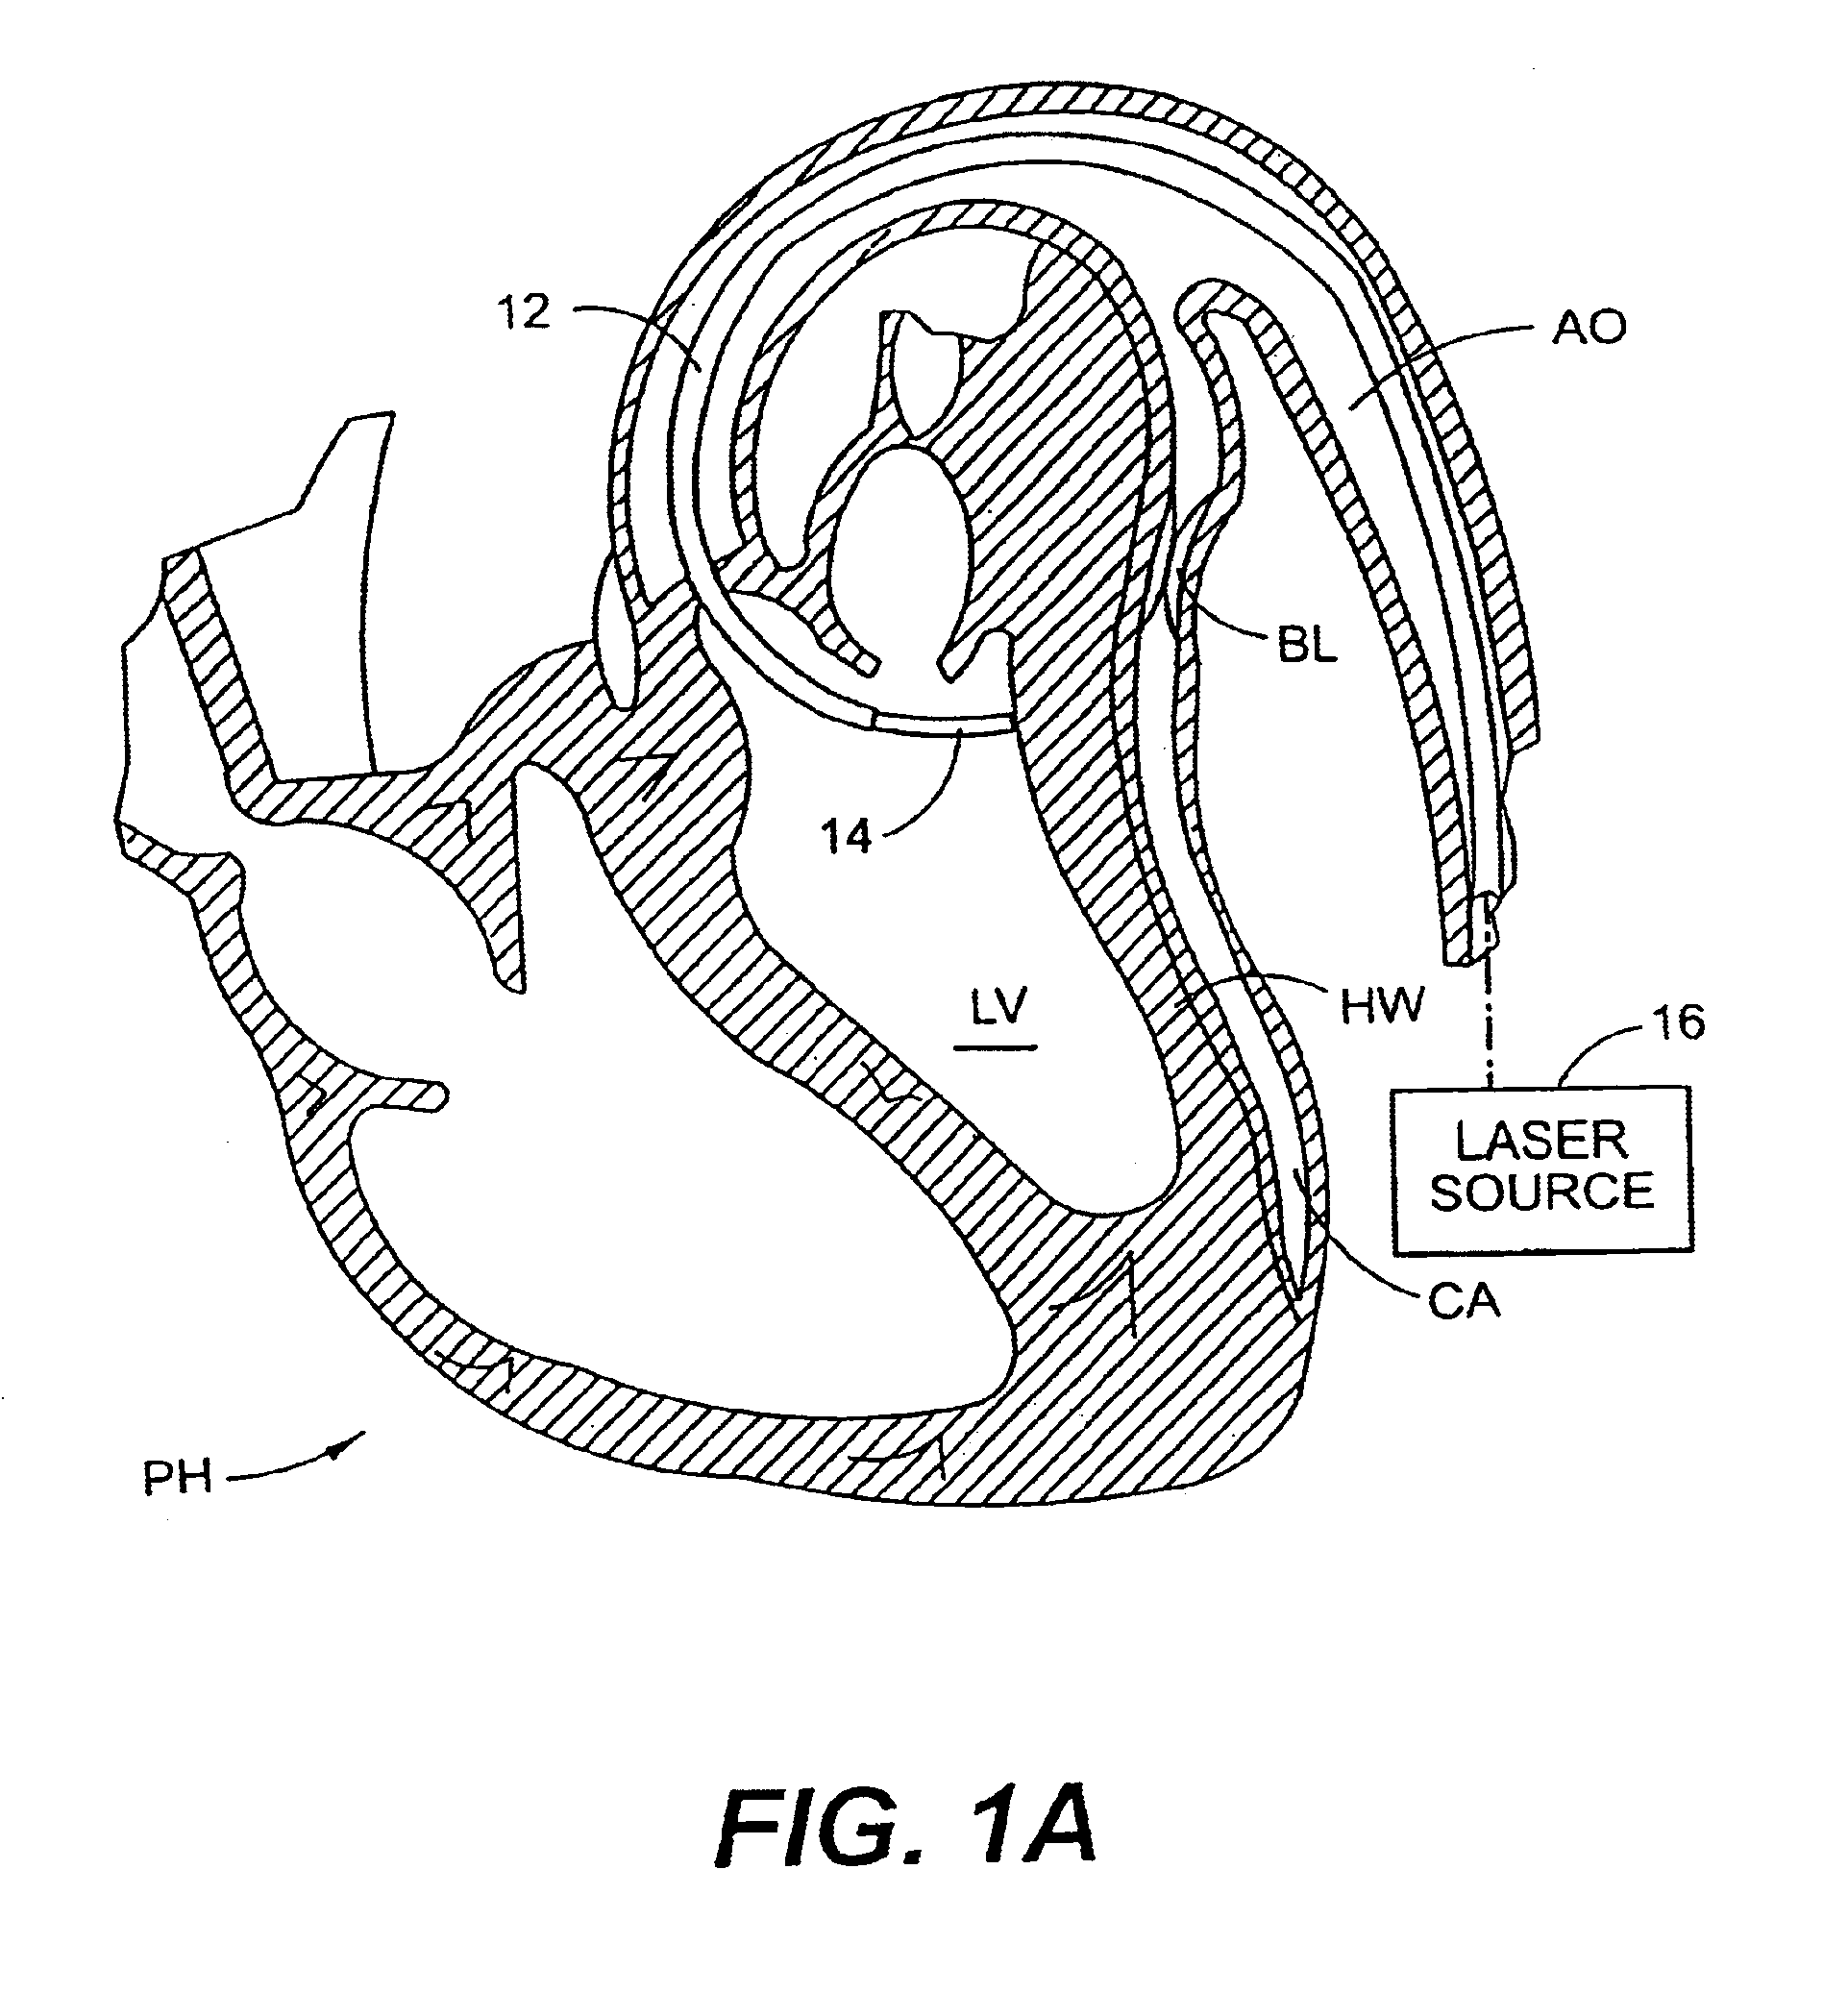 Left ventricular conduits to coronary arteries and methods for coronary bypass